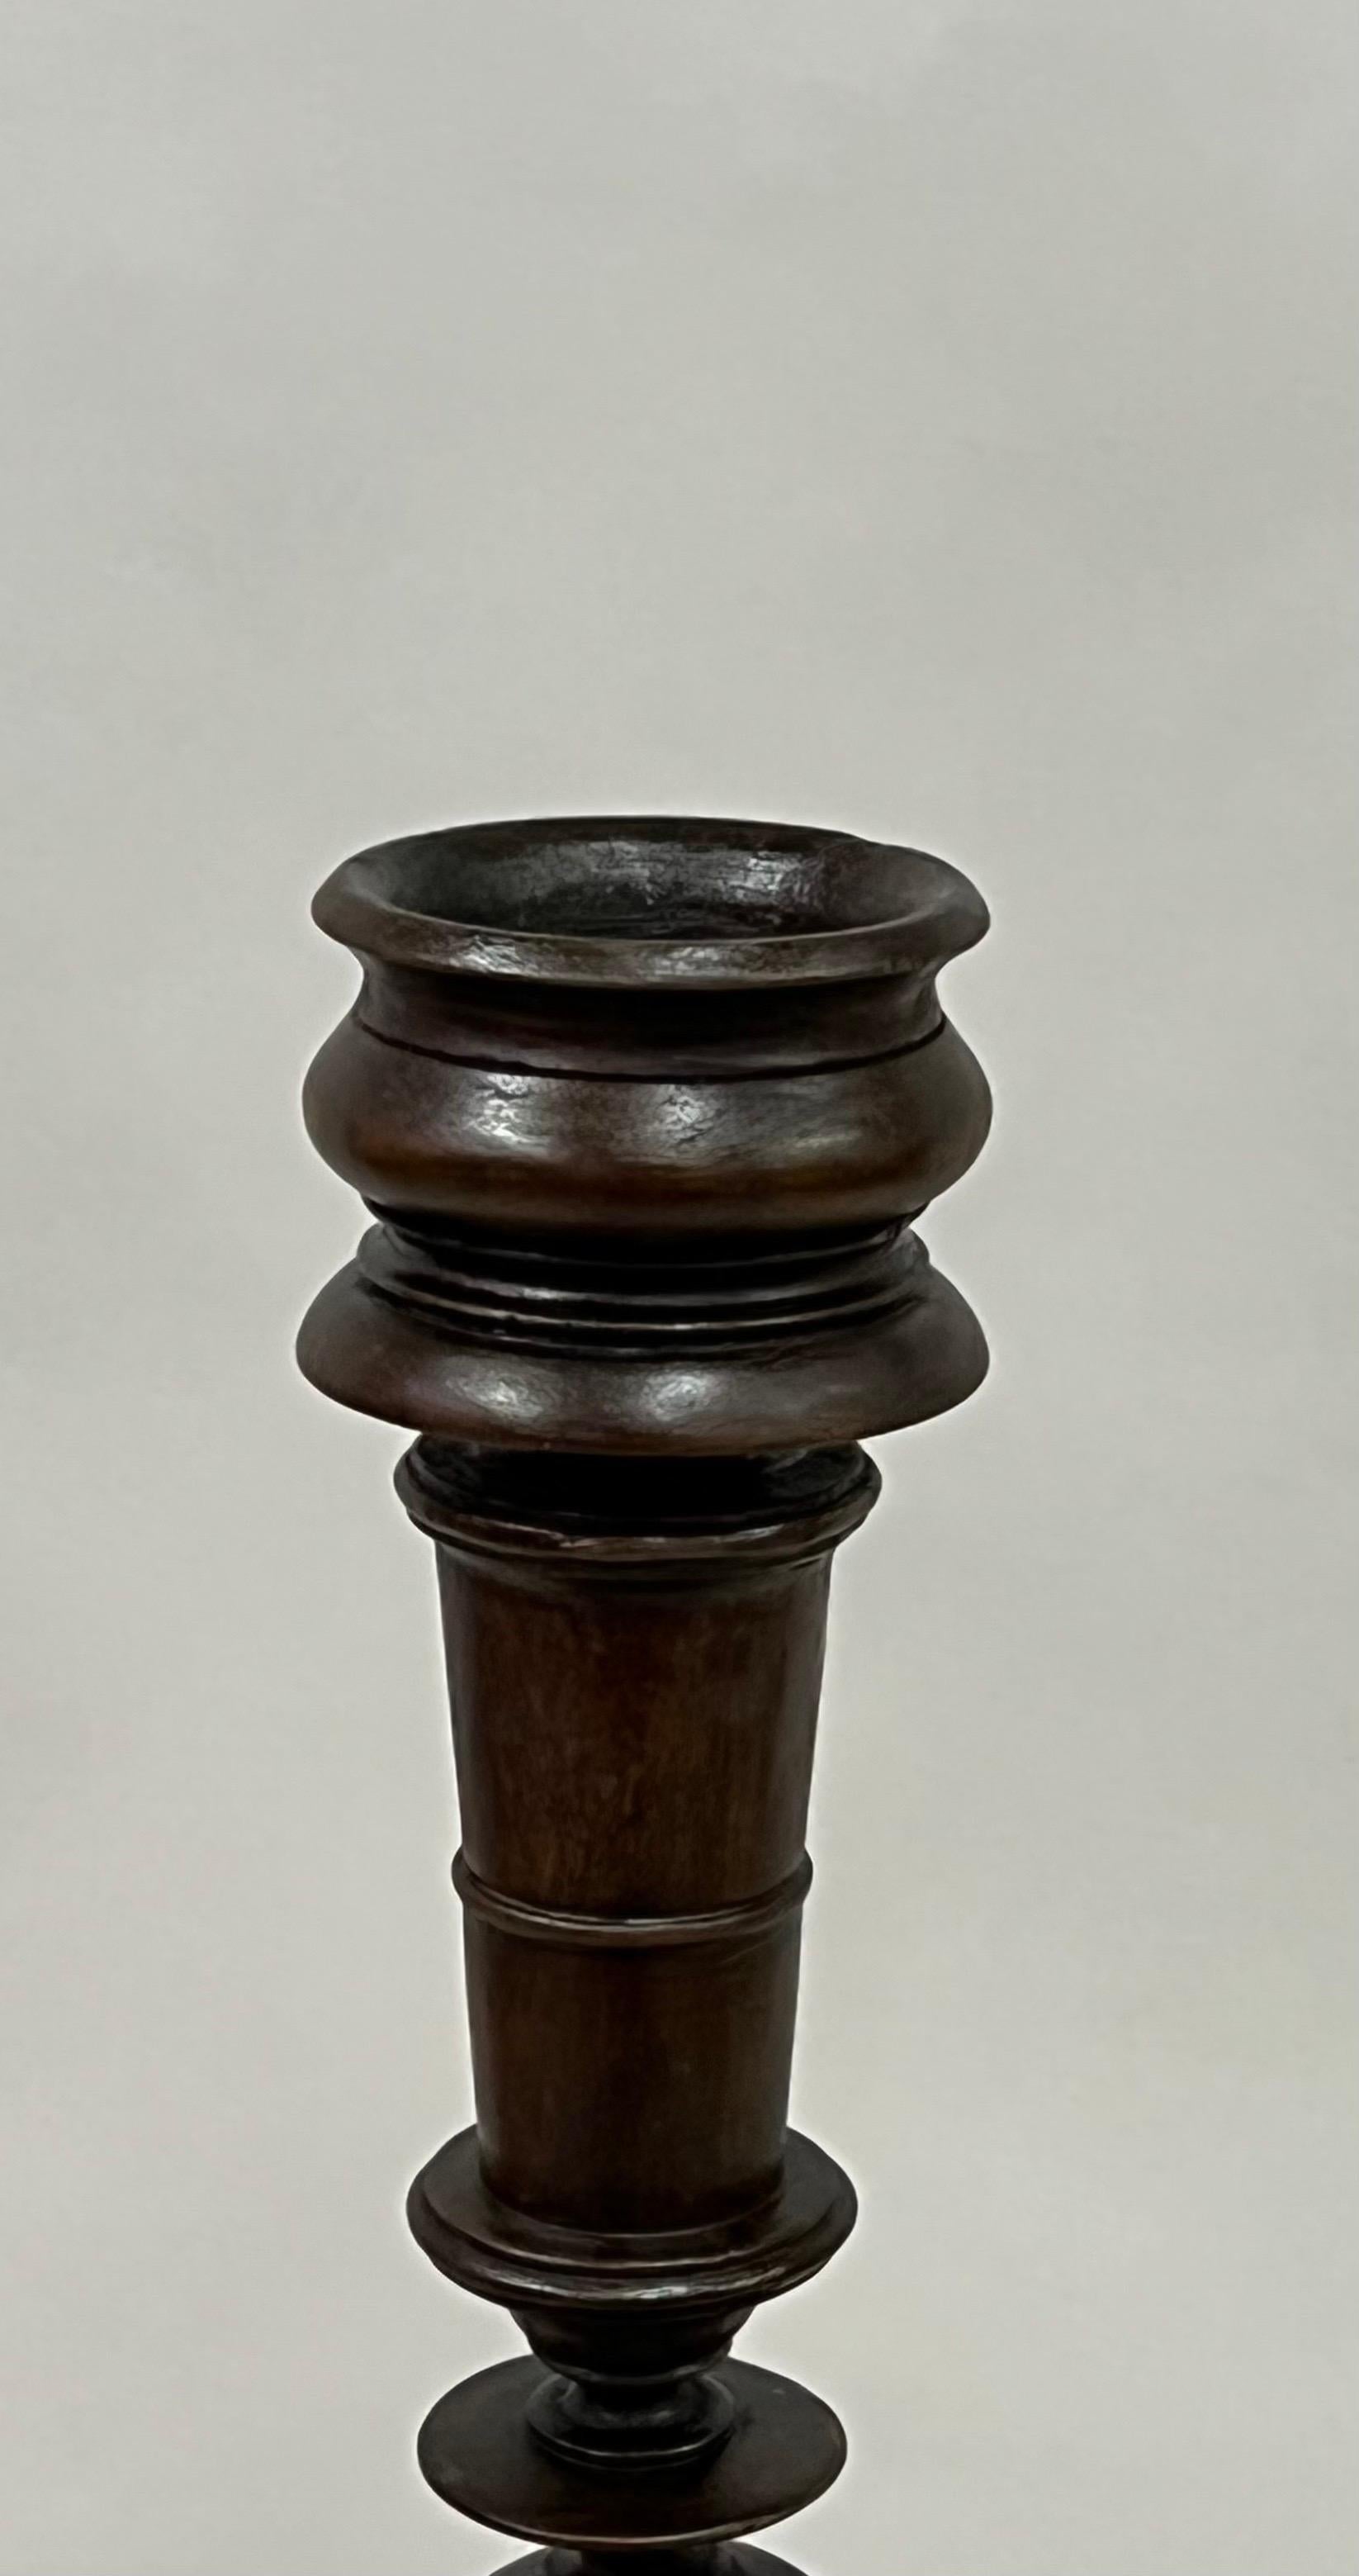 Pair of French Colonial Carved Teak Wood Table Lamp Bases or Candelabras c. 1930 For Sale 4